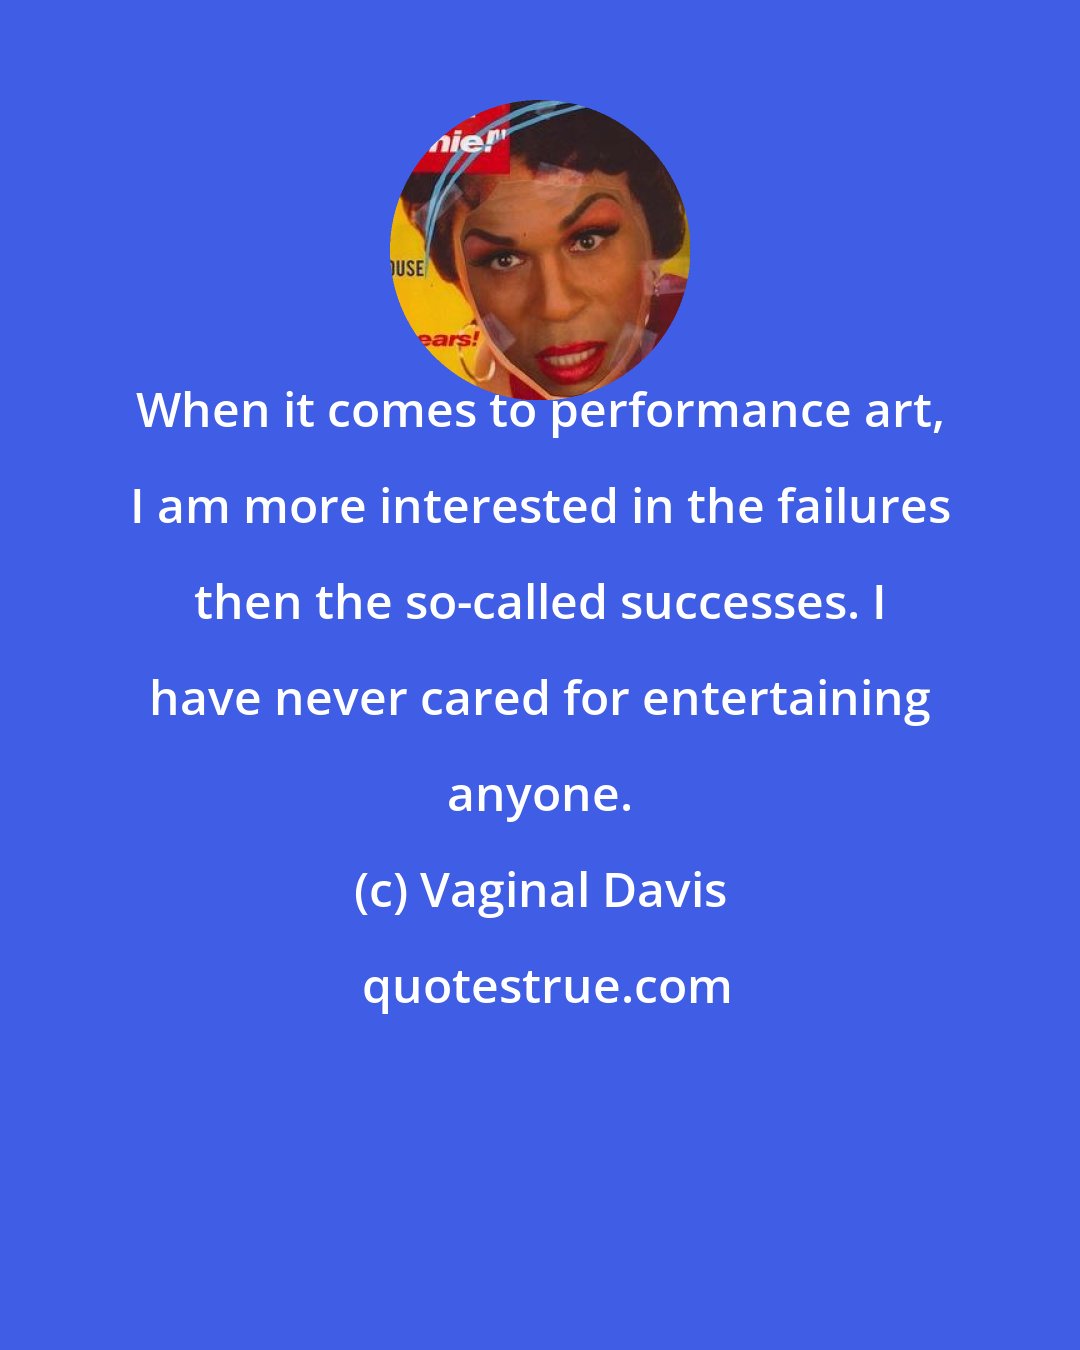 Vaginal Davis: When it comes to performance art, I am more interested in the failures then the so-called successes. I have never cared for entertaining anyone.